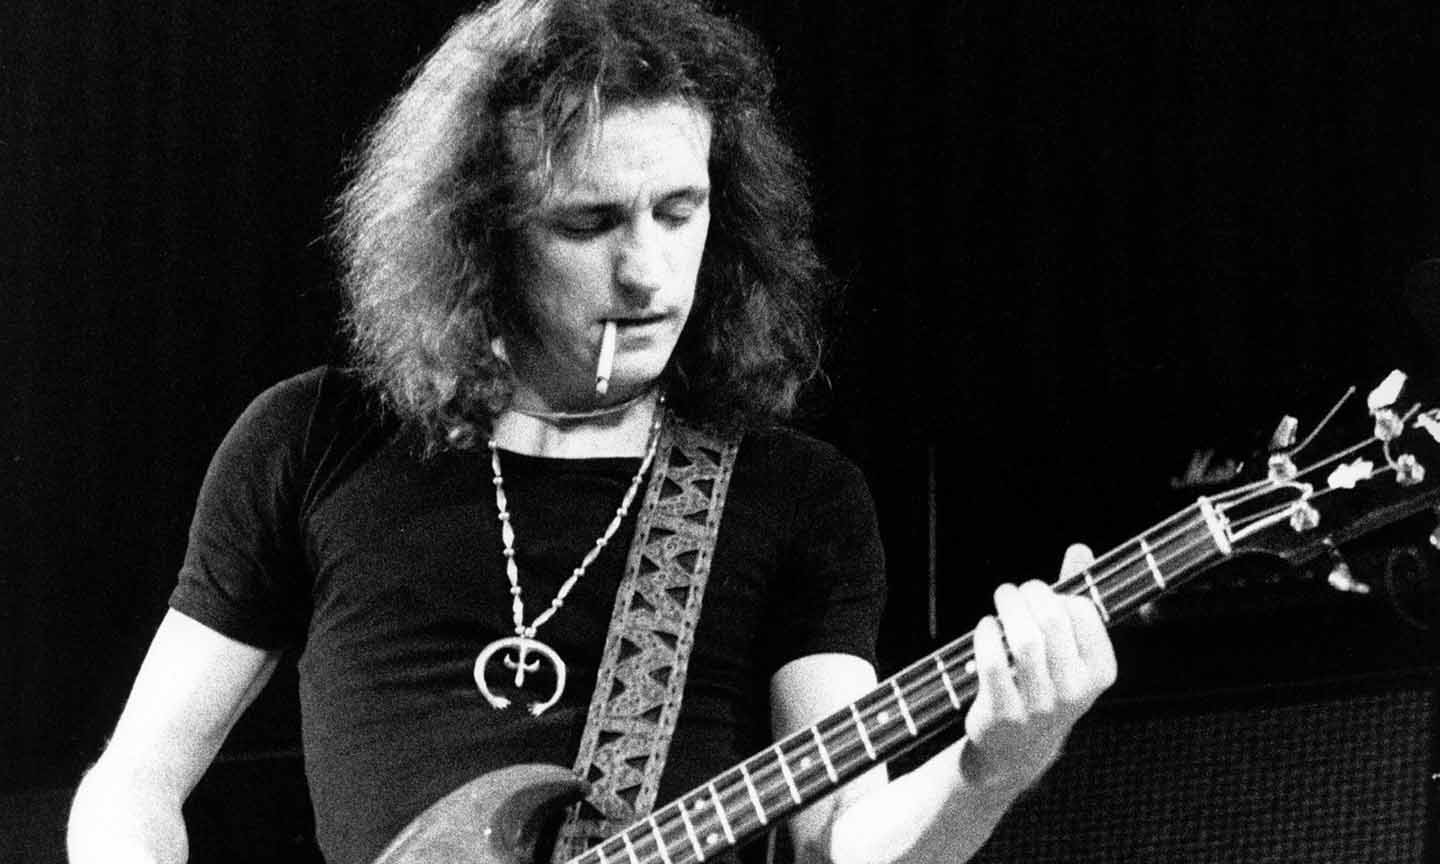 Remembering Jack Bruce, A True Giant Of Music